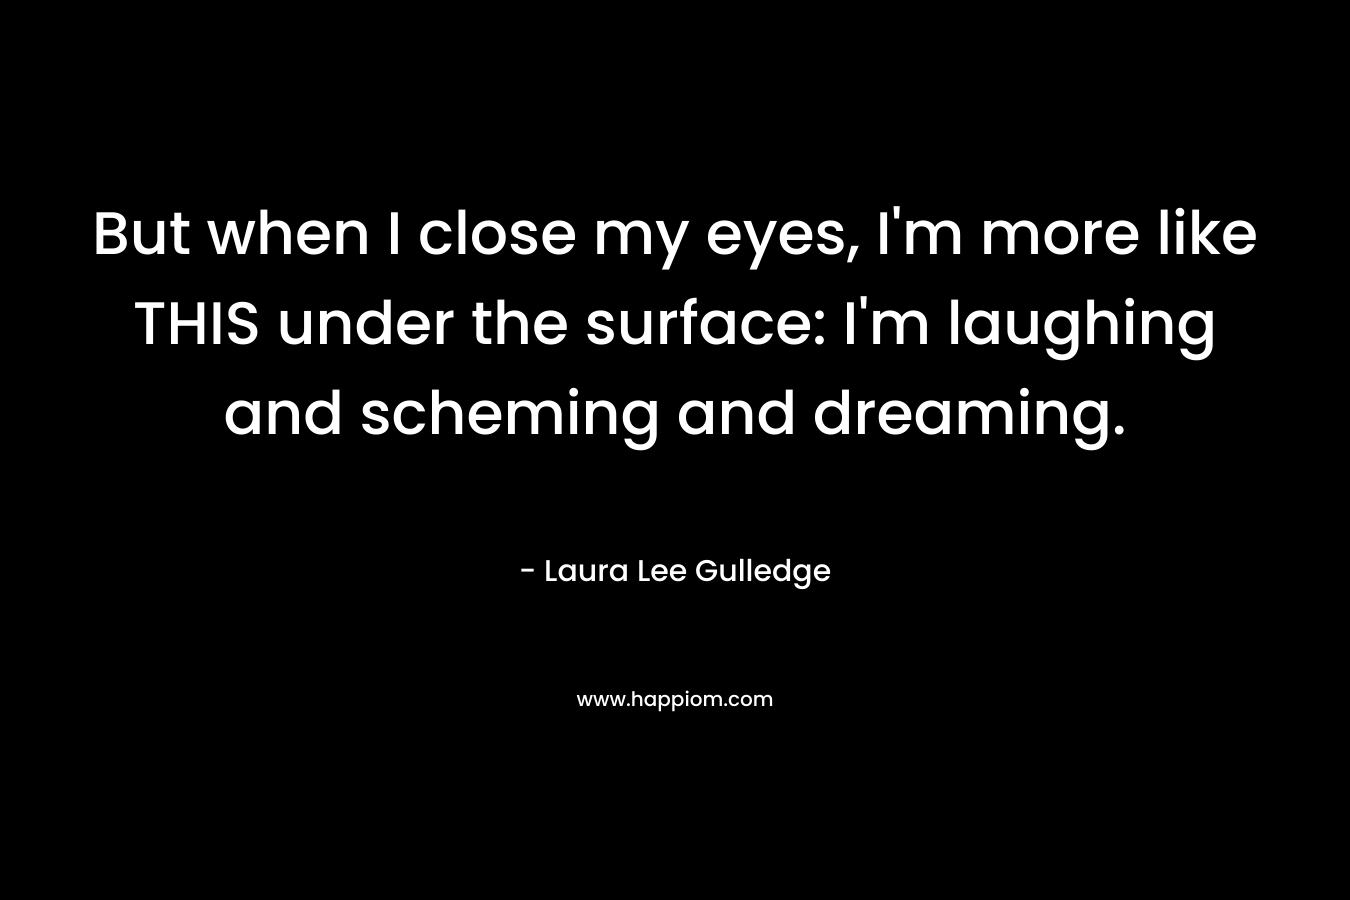 But when I close my eyes, I’m more like THIS under the surface: I’m laughing and scheming and dreaming. – Laura Lee Gulledge